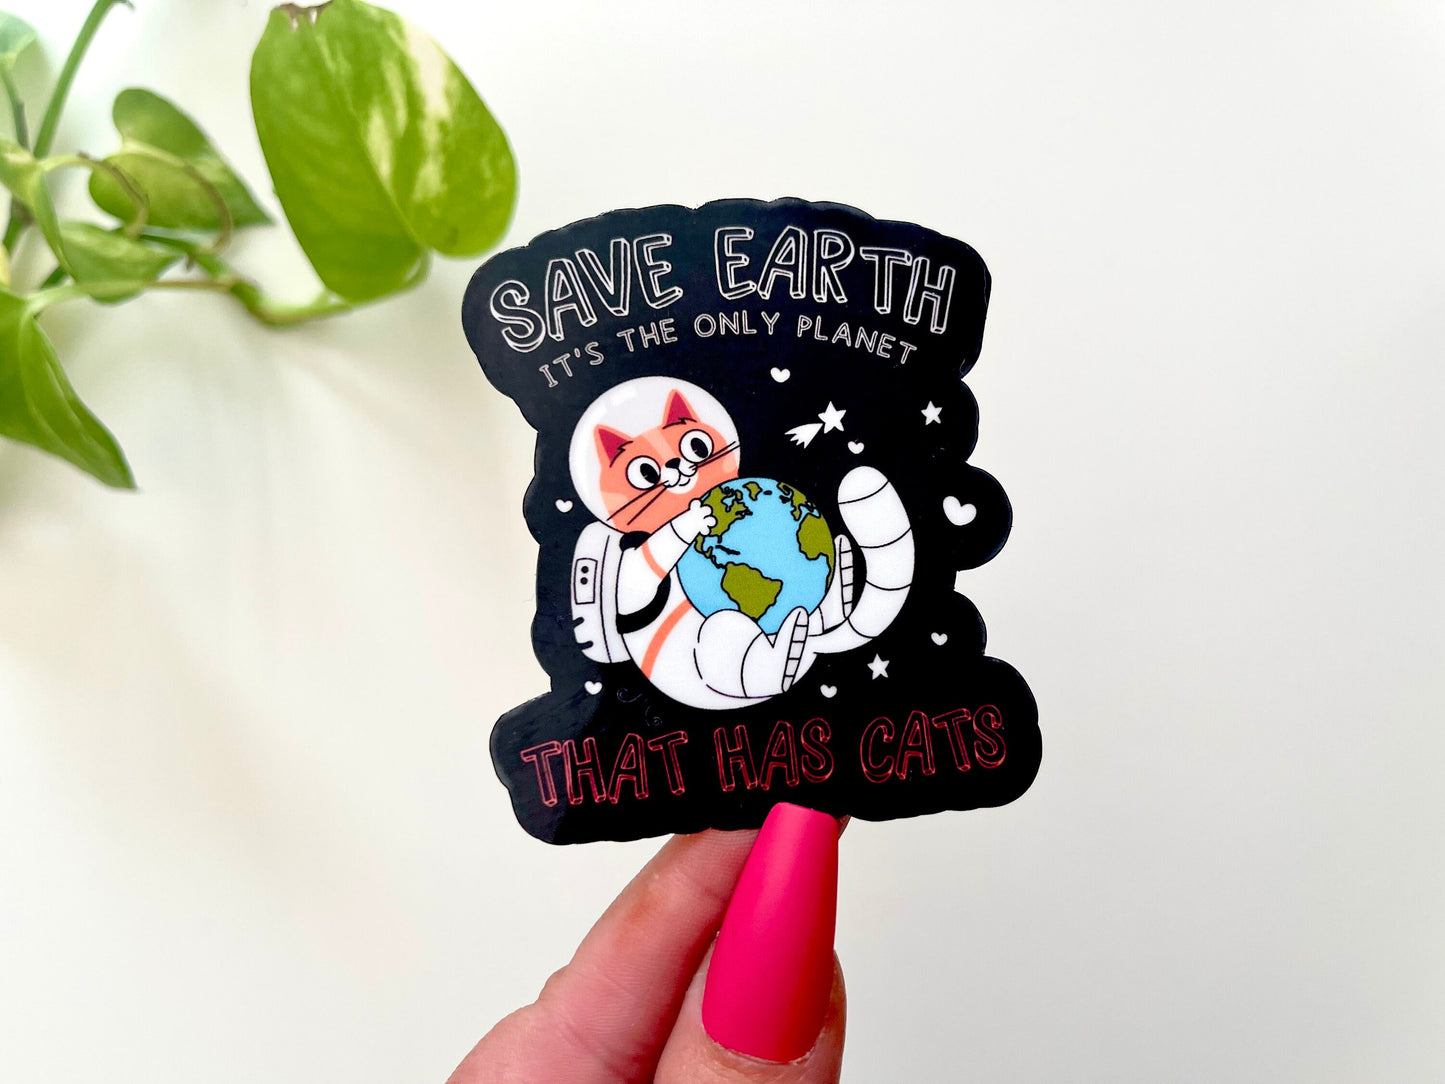 Save Earth Waterproof Sticker, Funny Stickers, Cat Sticker, Gifts for Cat Owner, Cat Mom Stickers, Waterbottle Stickers